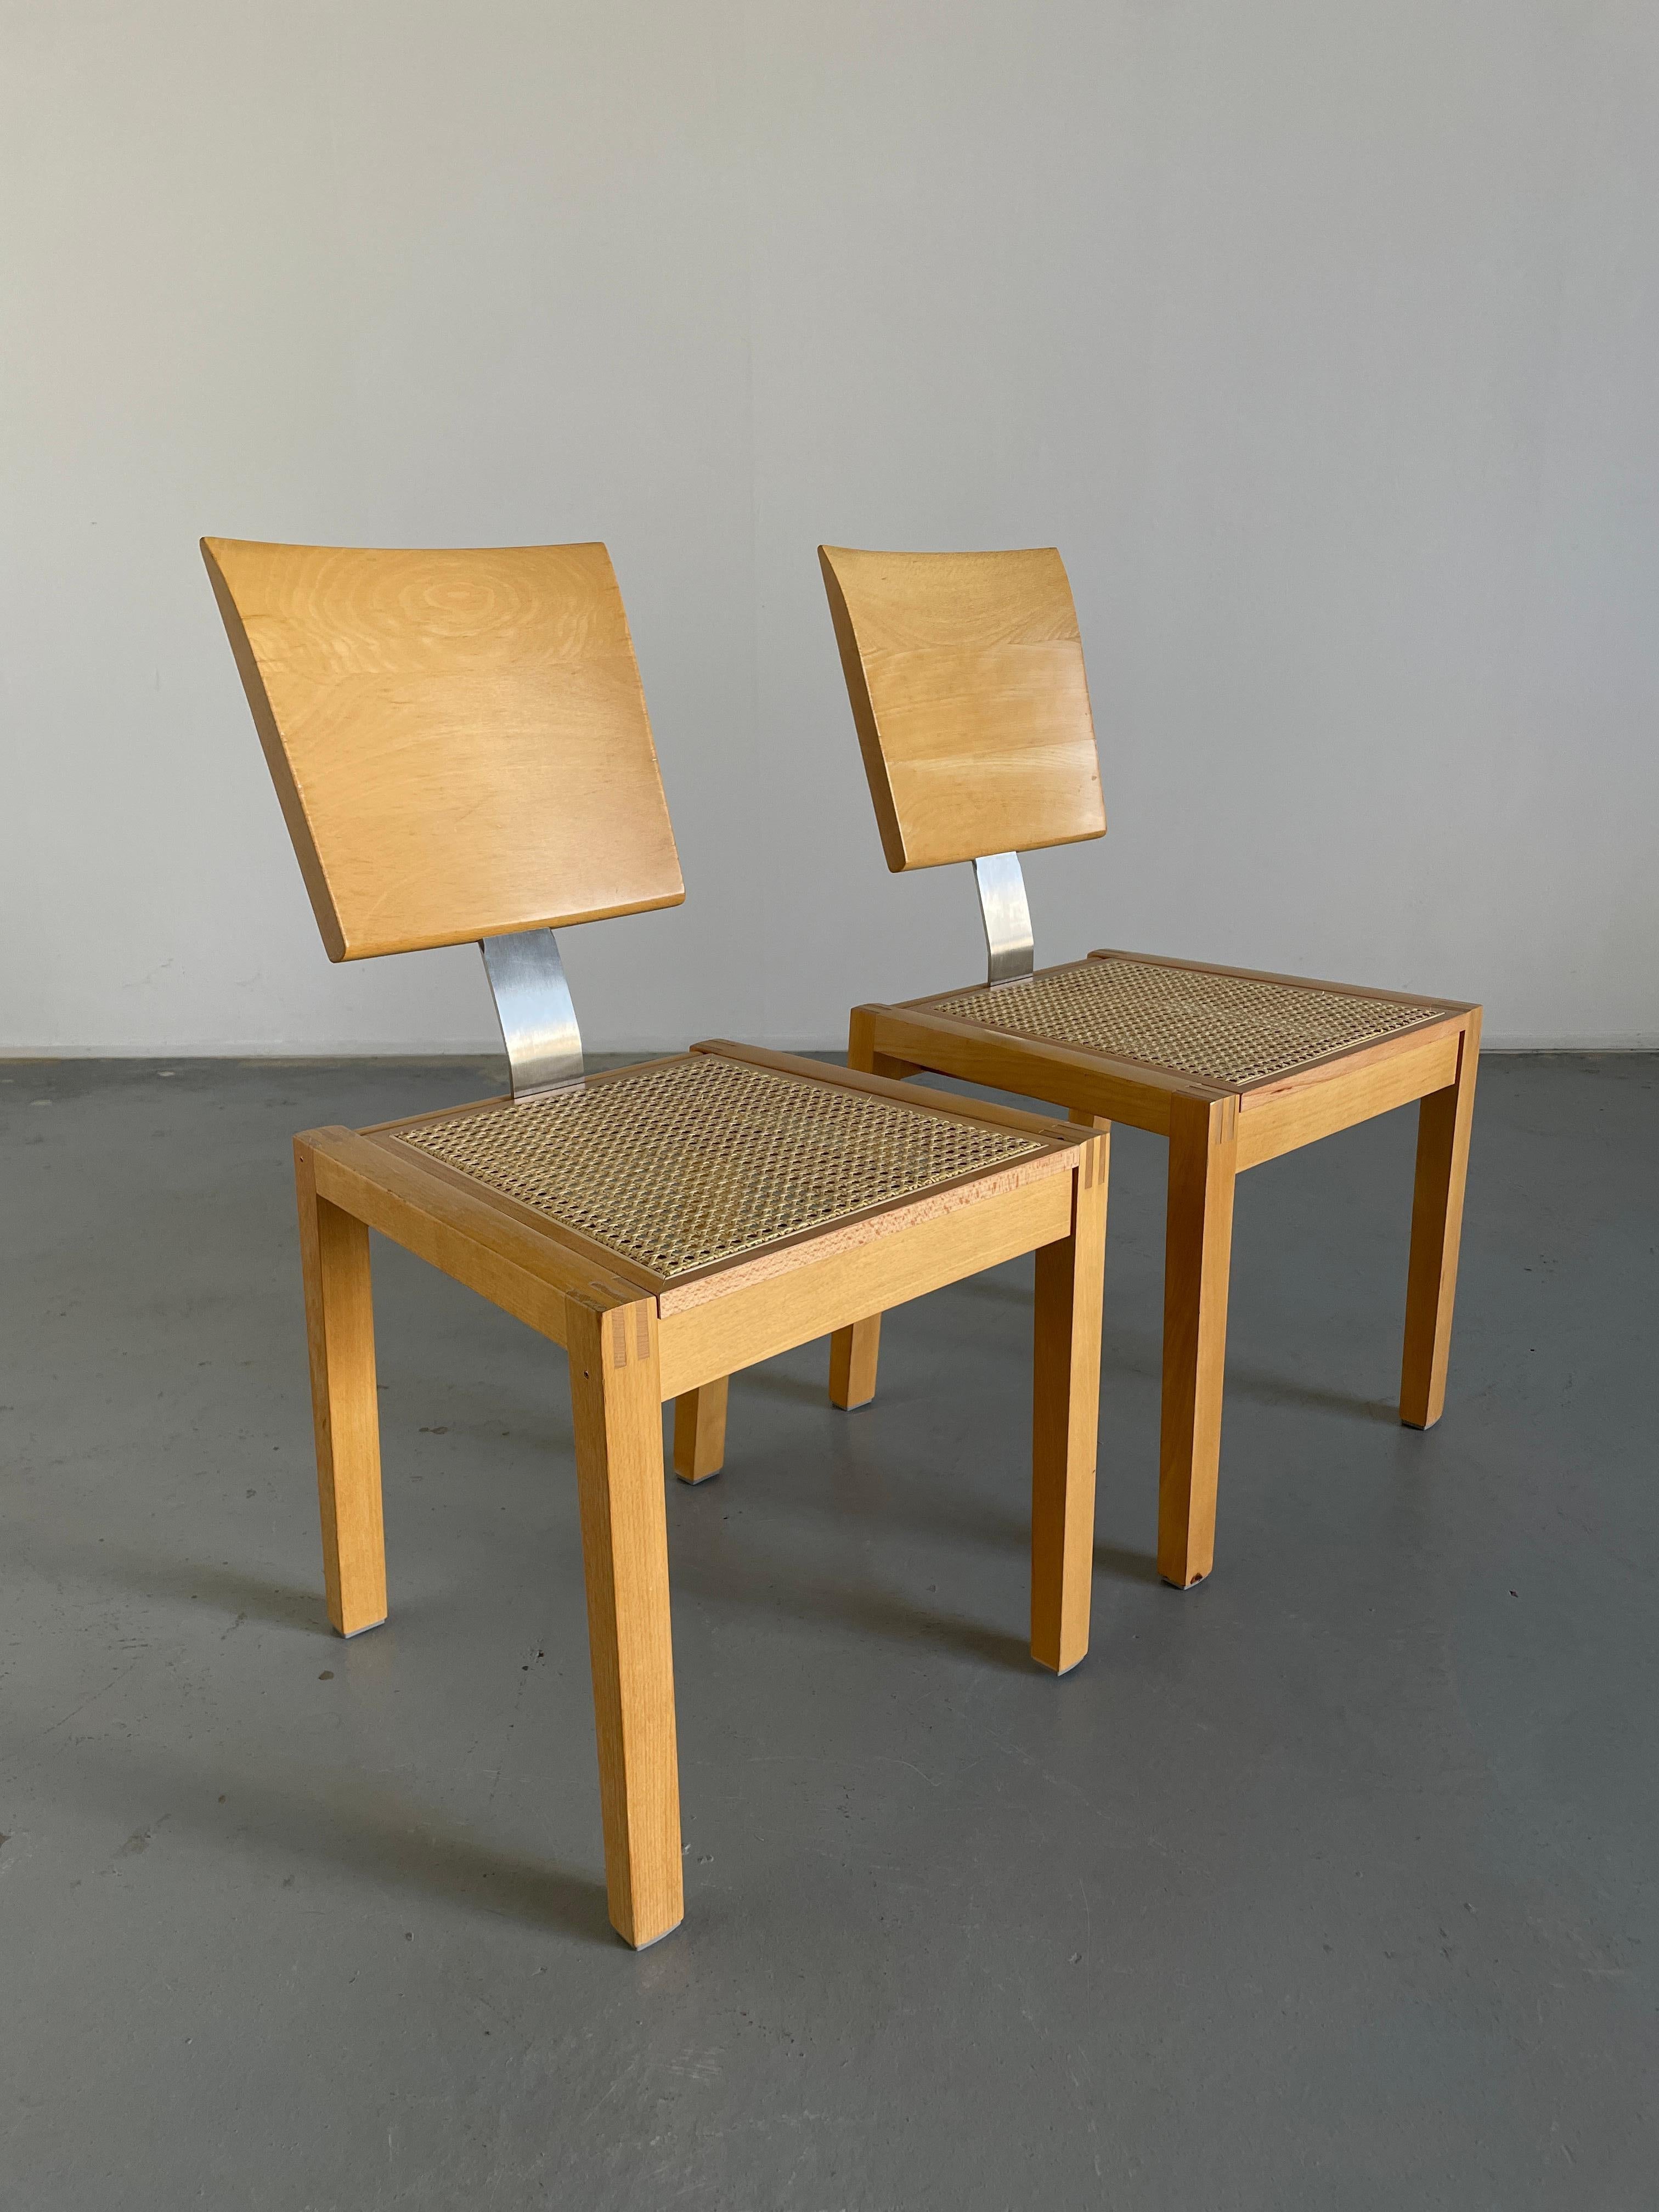 Late 20th Century 1 of 2 Vintage Postmodern Geometrical Beechwood and Cane Dining Chairs, 1990s For Sale